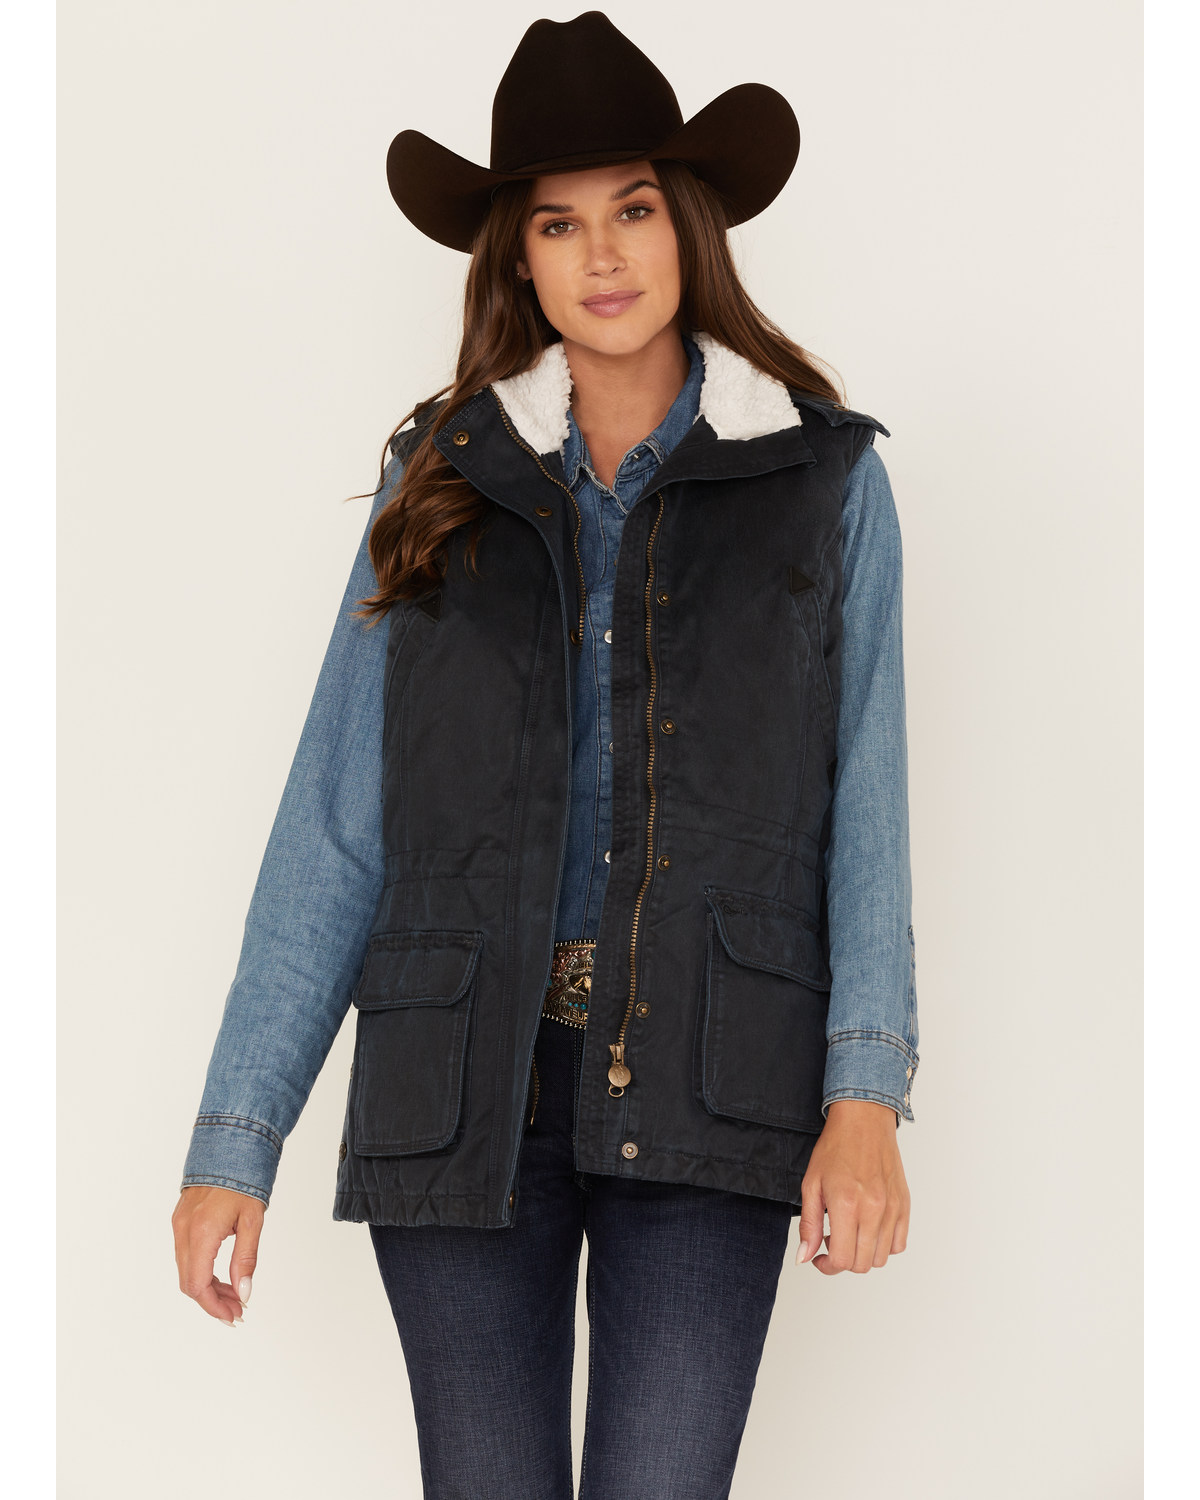 Outback Trading Co Women's Woodbury Vest